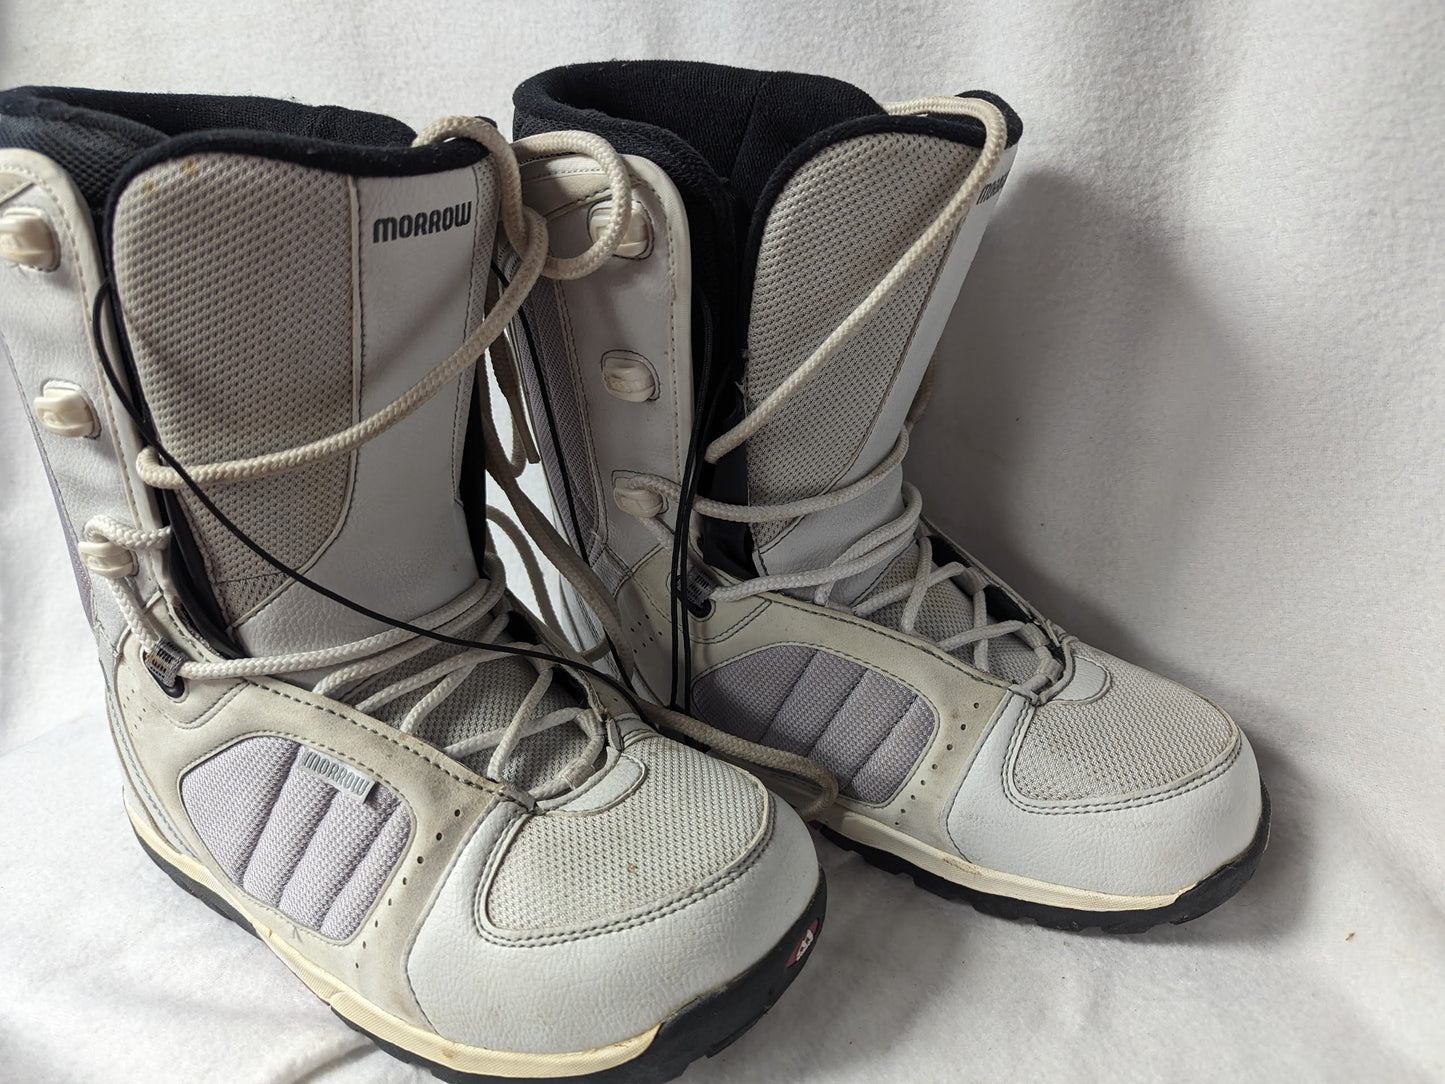 Morrow Women's Snowboard Boots Size Women 10 Color White Condition Used